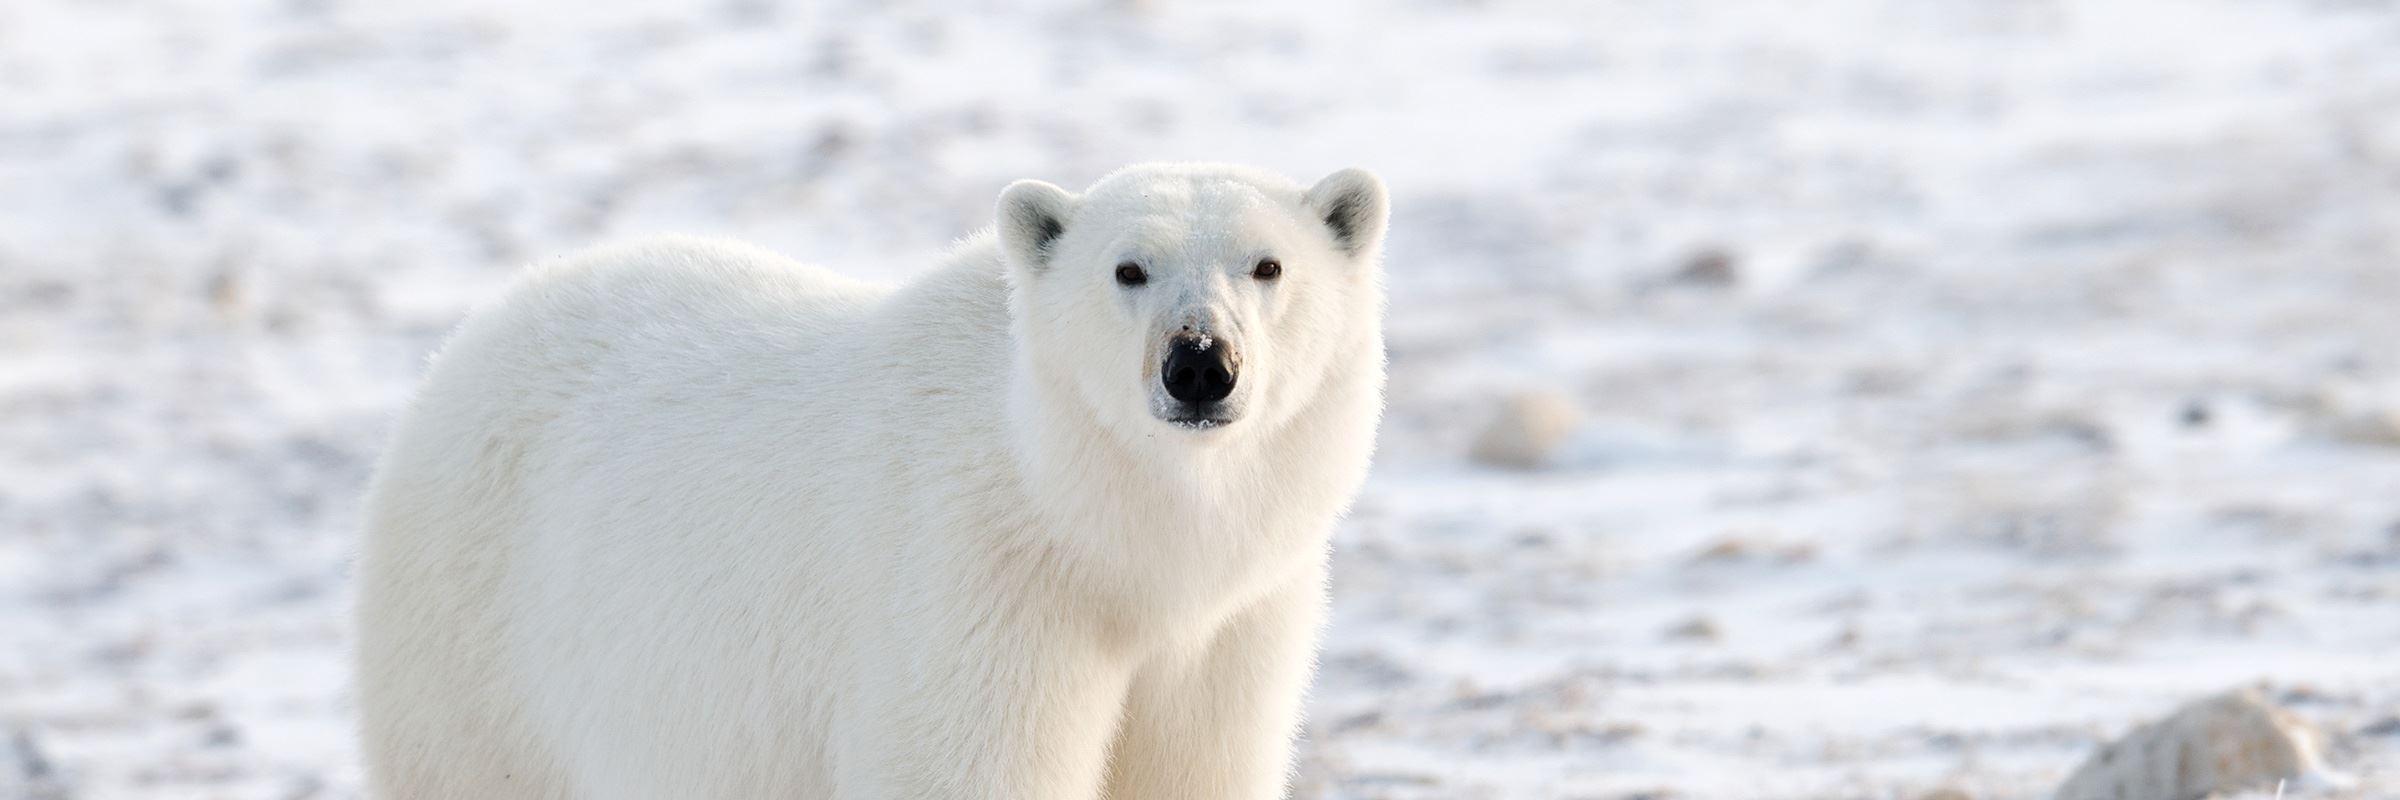 Polar bear watching in Canada | Audley Travel